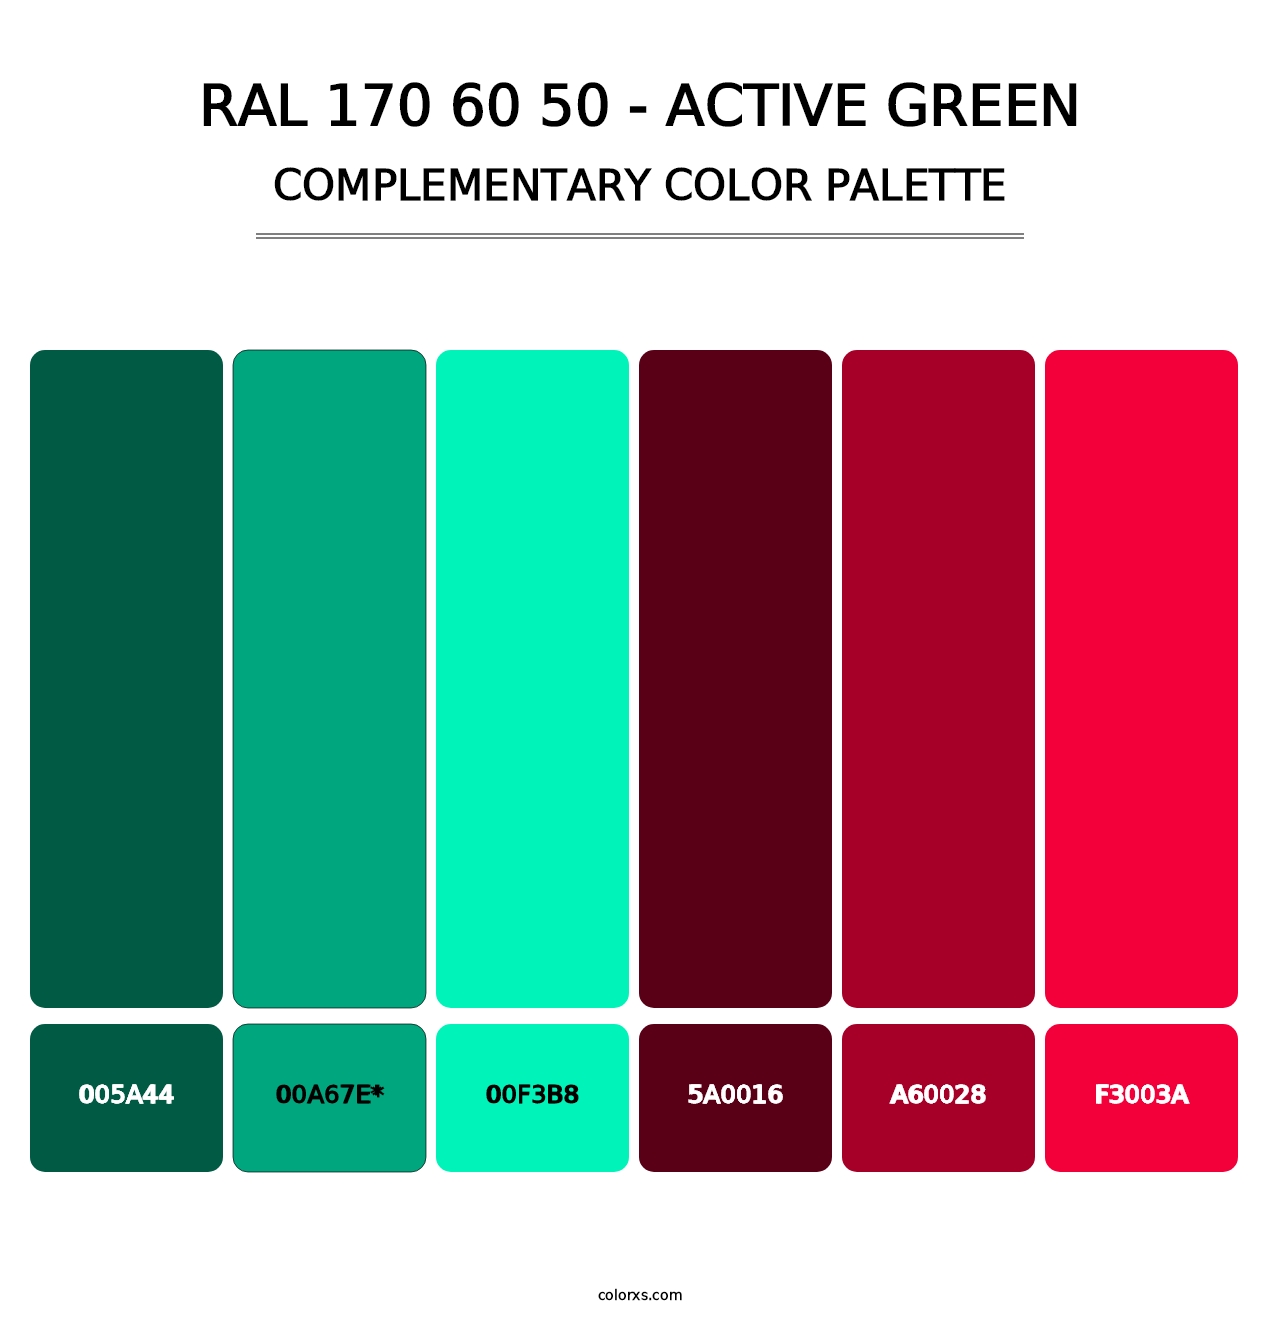 RAL 170 60 50 - Active Green - Complementary Color Palette